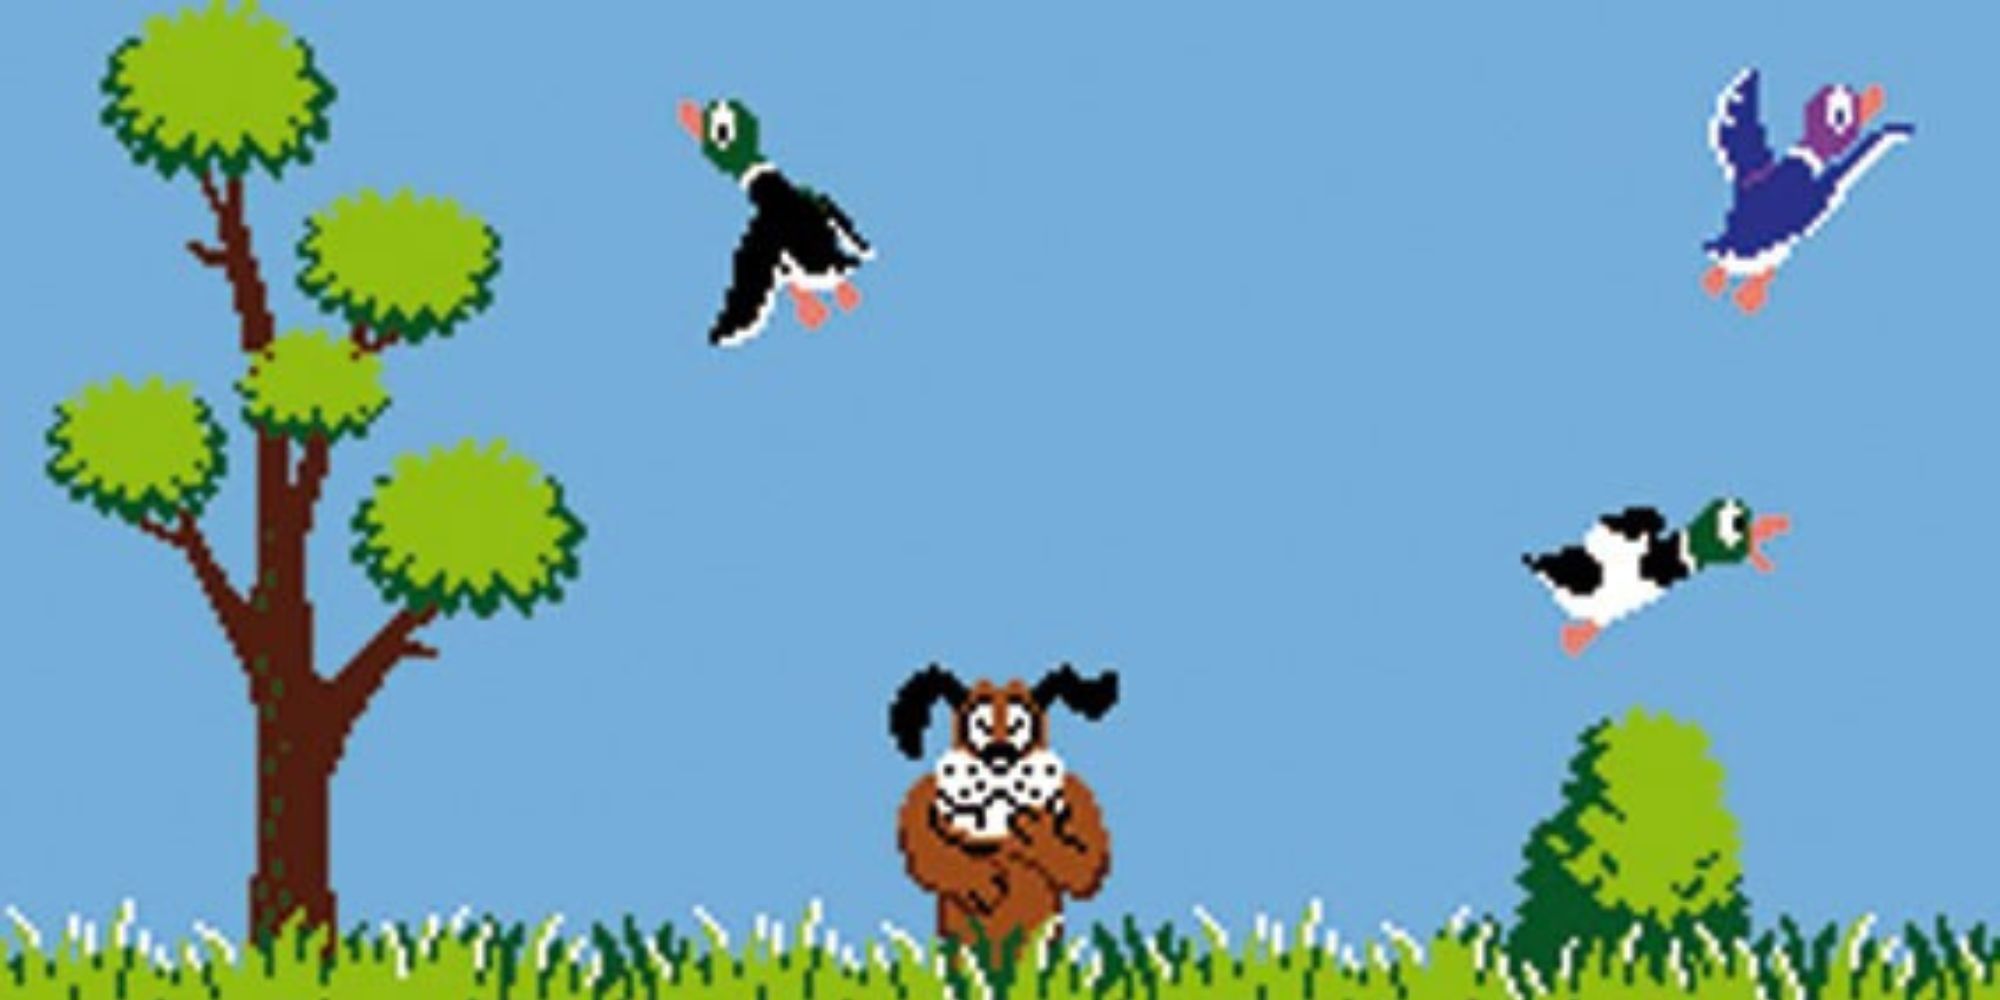 The Duck Hunt laughs as multiple ducks fly away